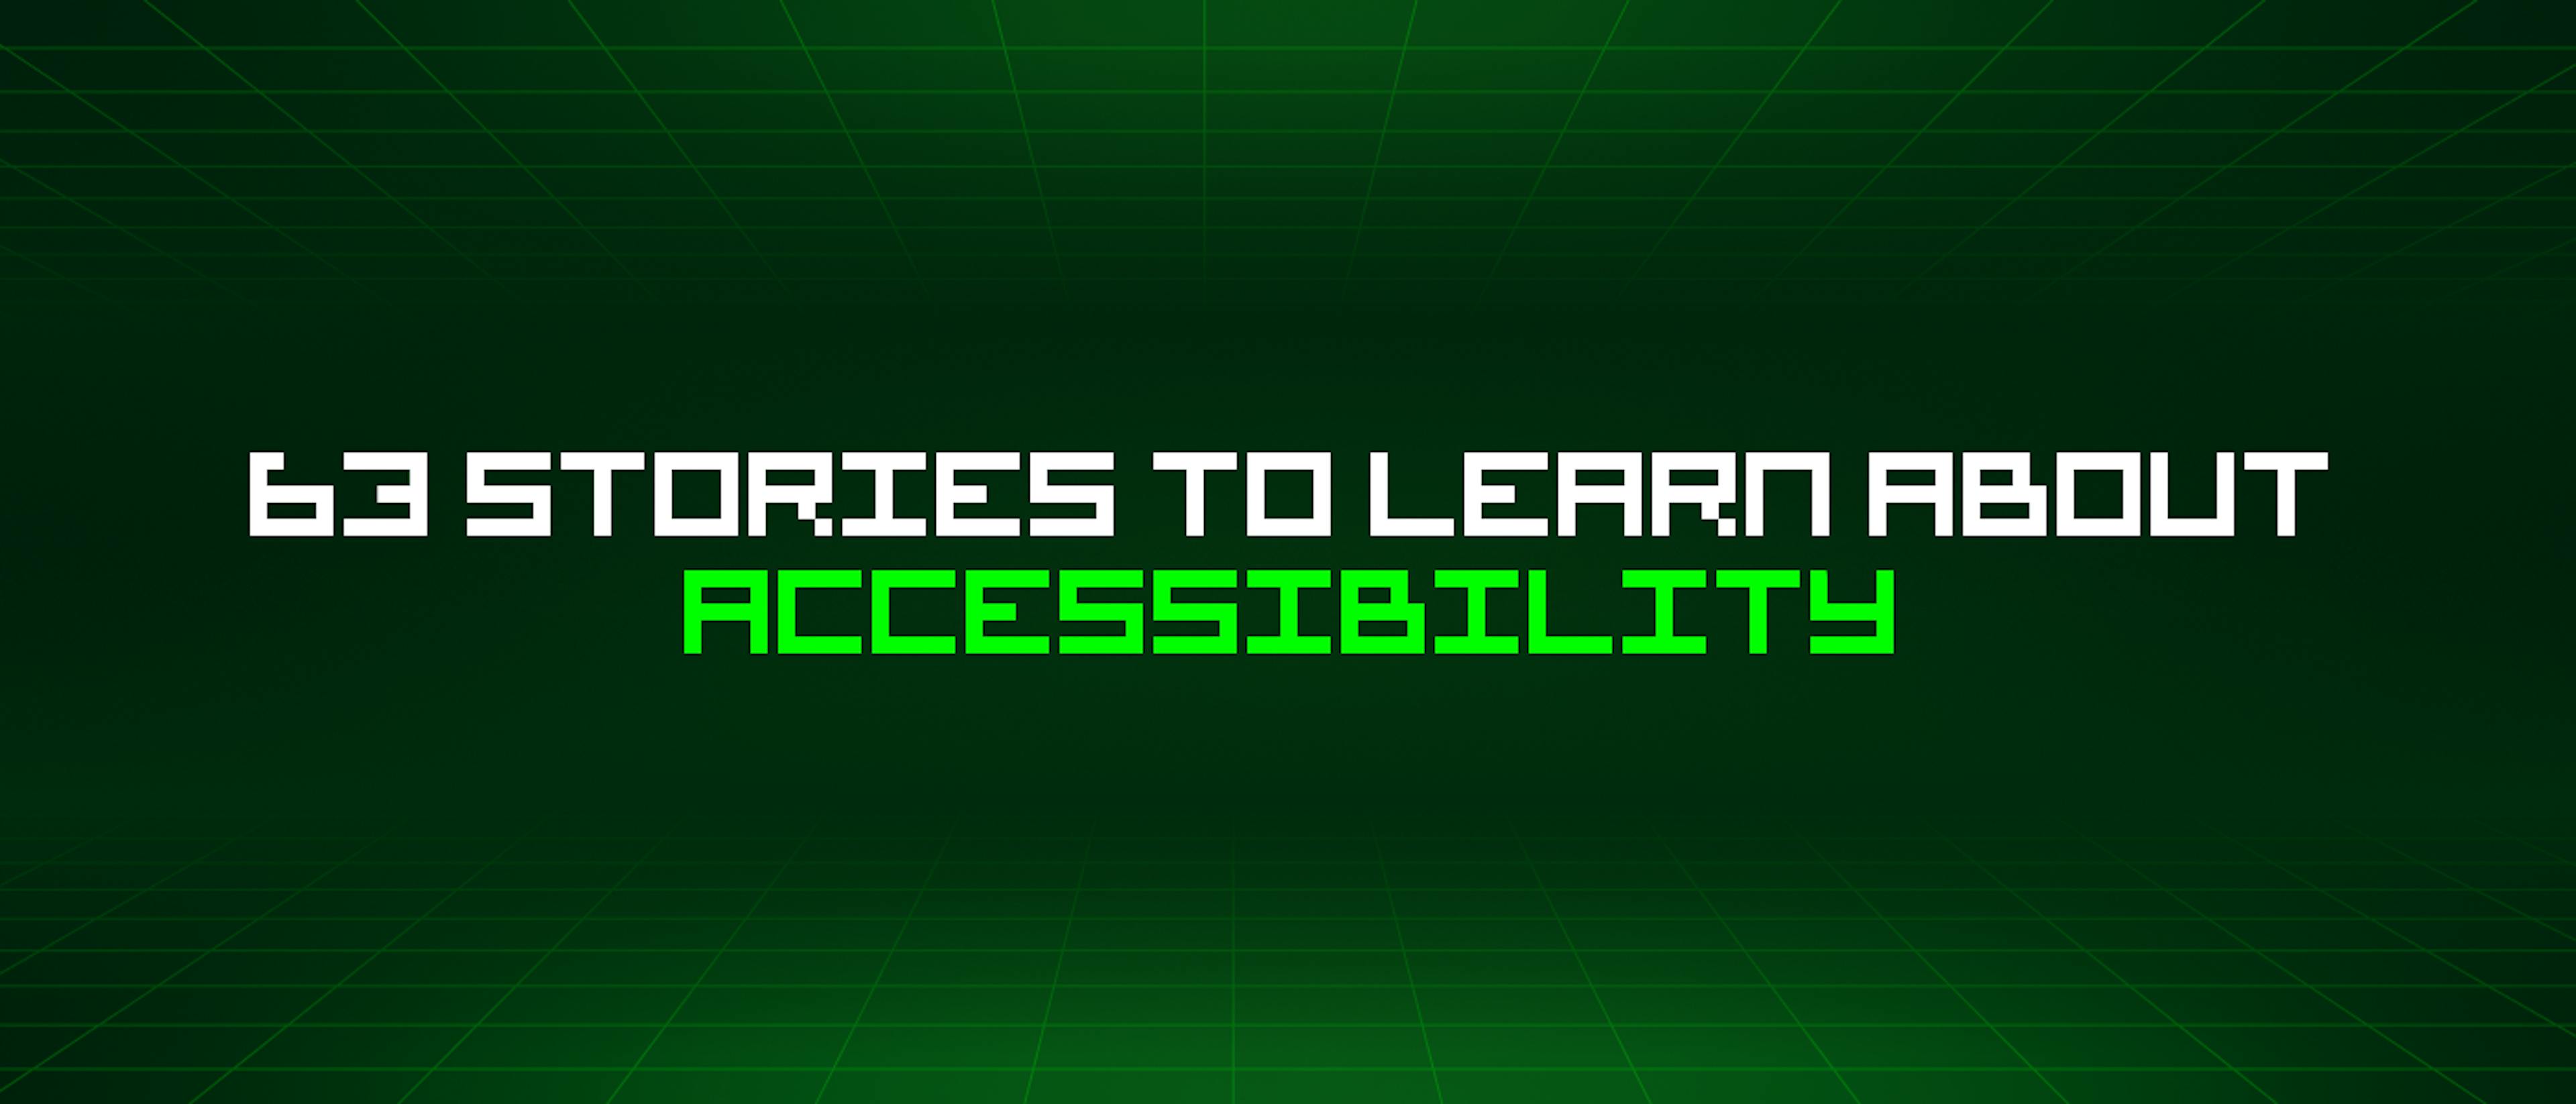 featured image - 63 Stories To Learn About Accessibility